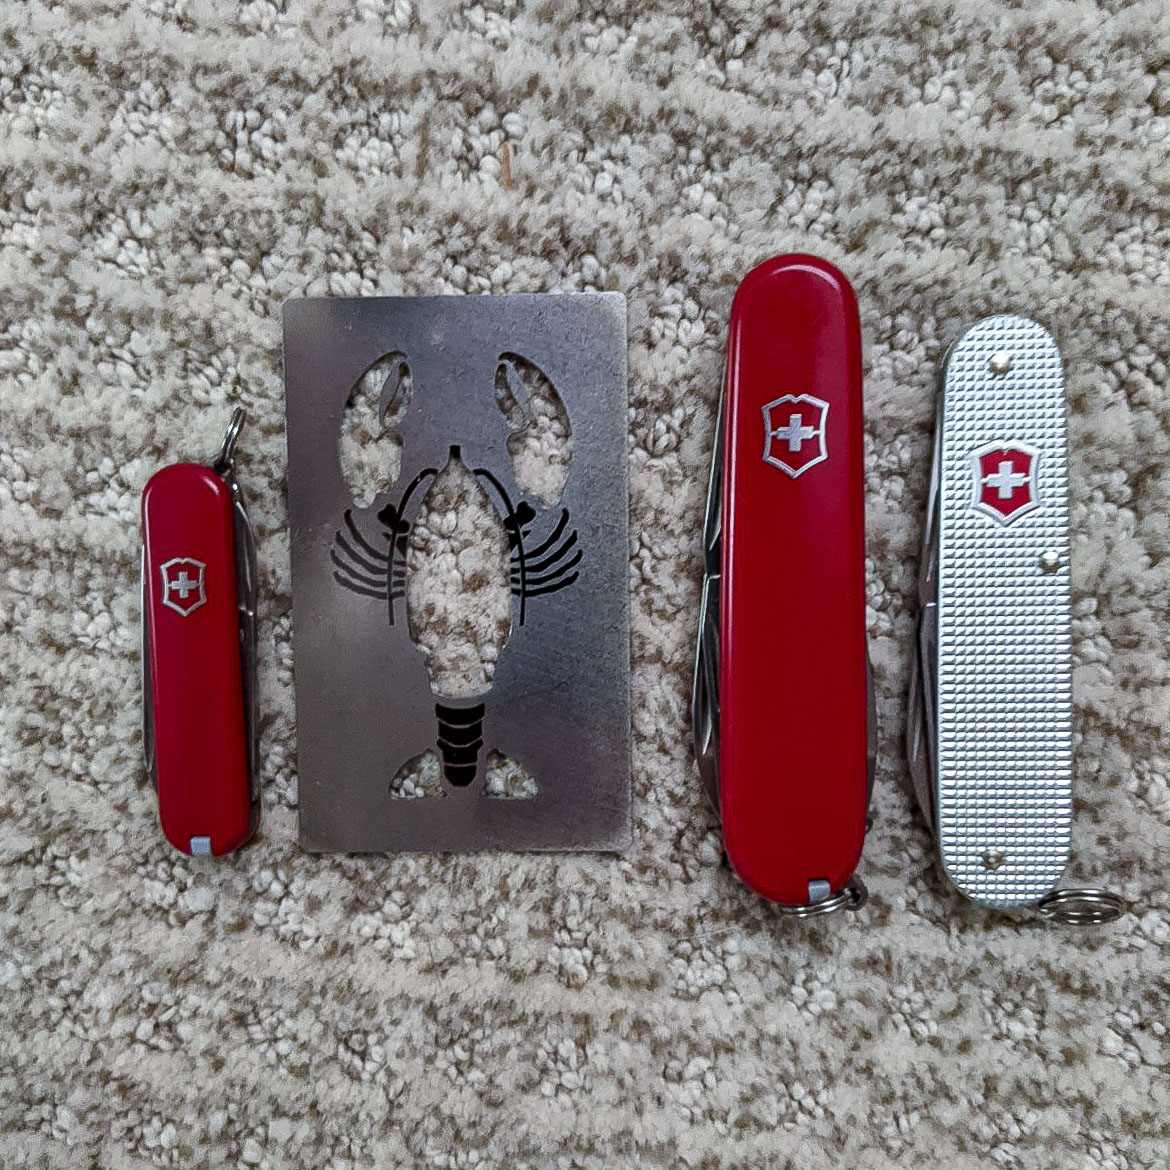 Important lot of knives including Swiss Army knives, Lag…